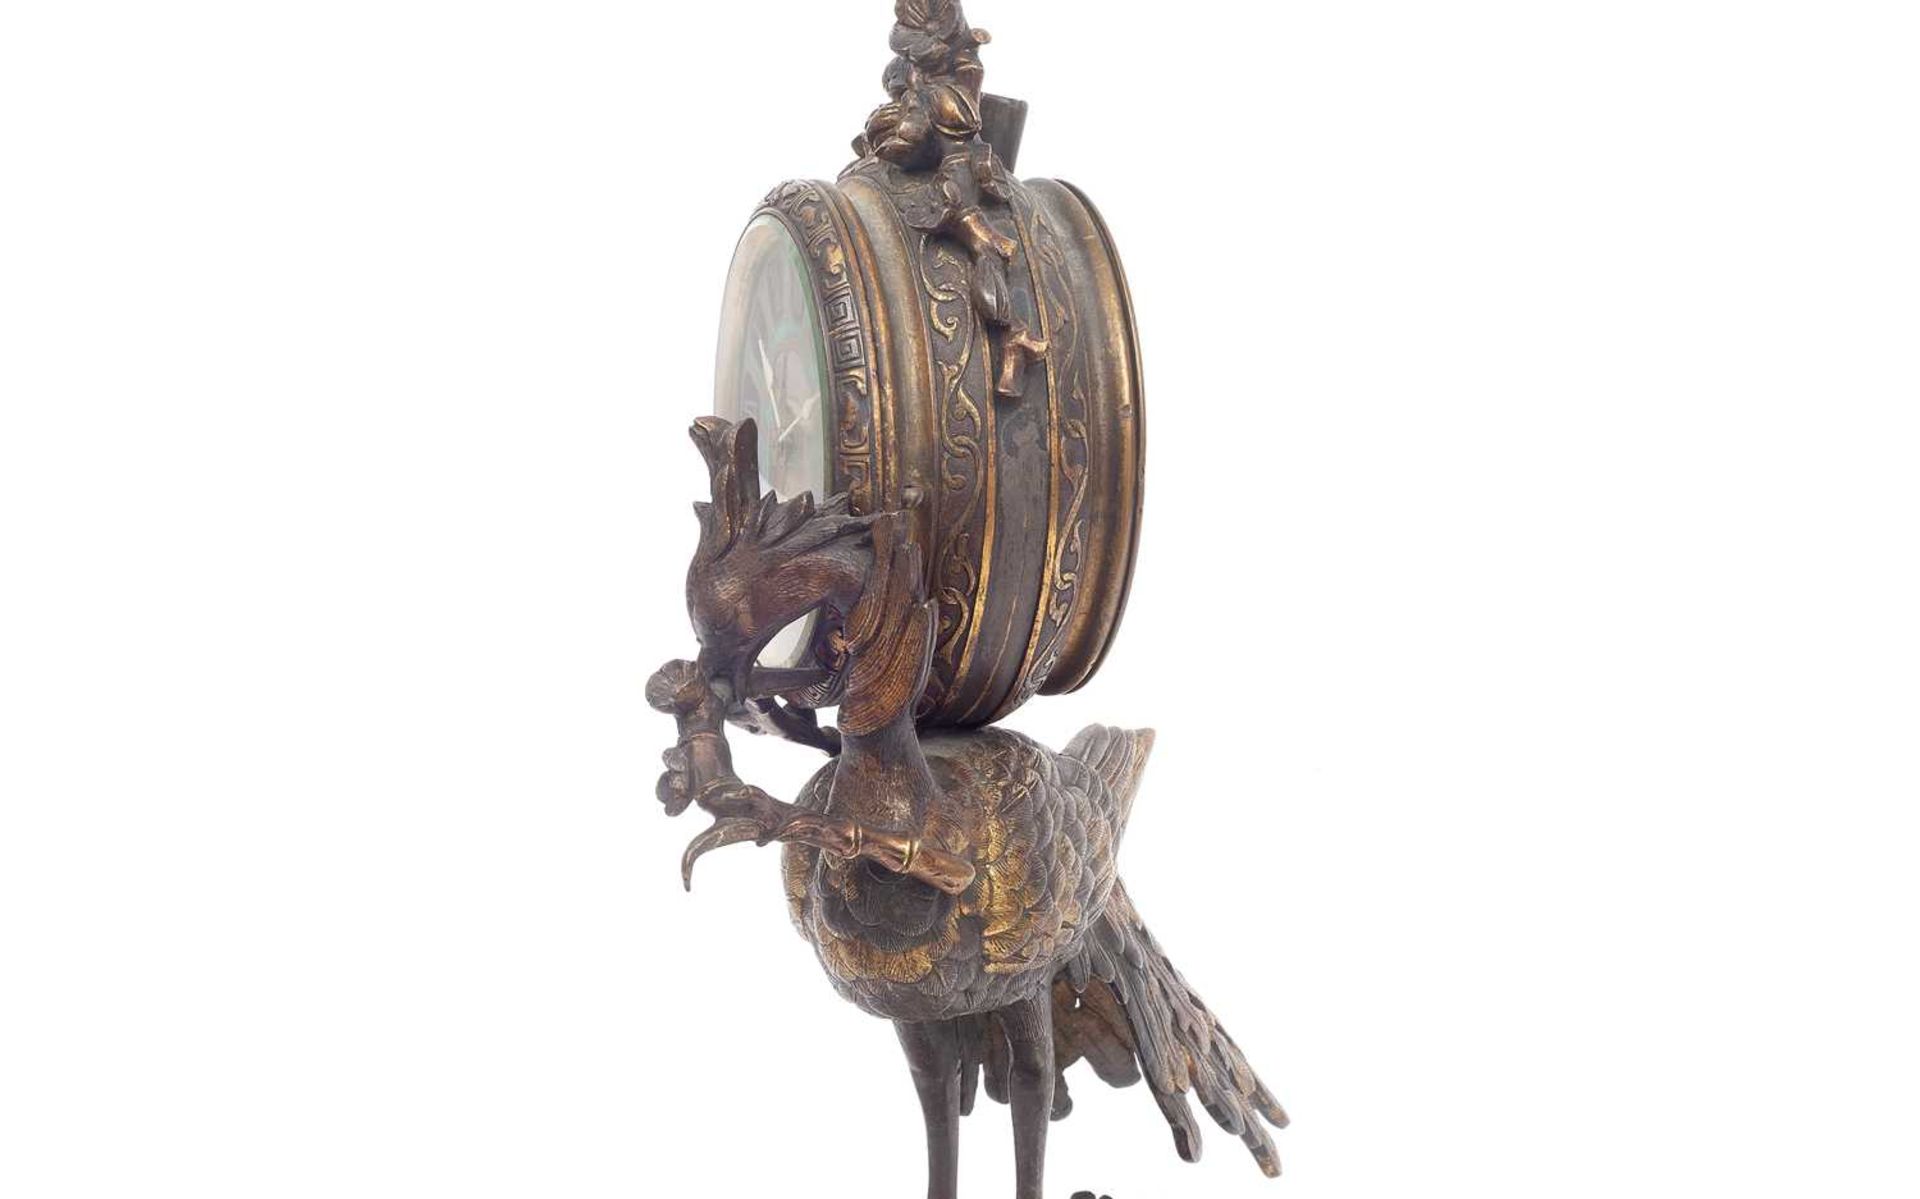 ATTRIBUTED TO L'ESCALIER DE CRISTAL, PARIS: A FINE LATE 19TH CENTURY FRENCH PEACOCK CLOCK - Image 2 of 4